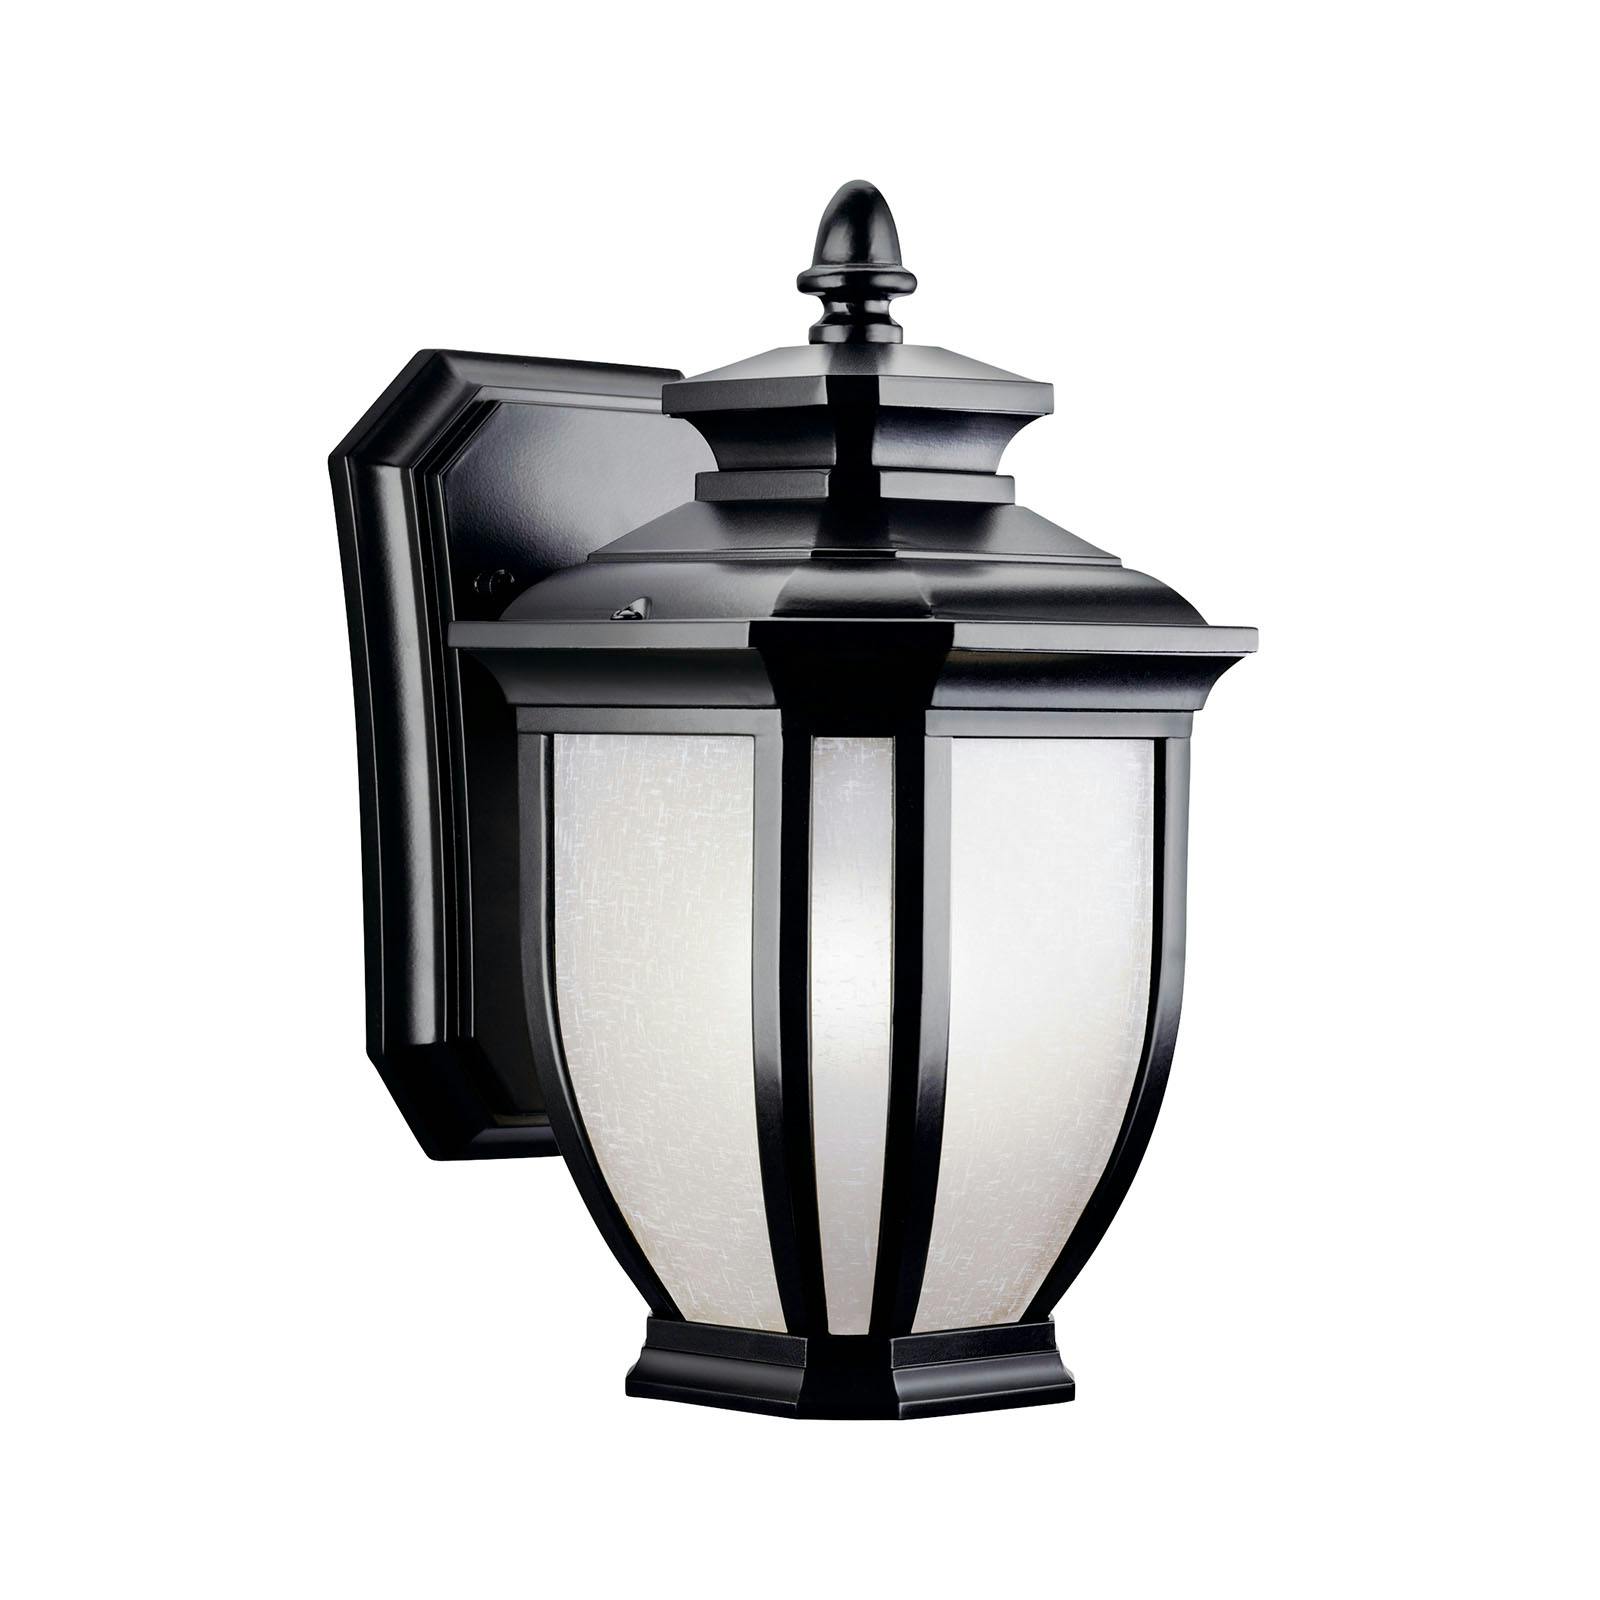 Salisbury 10.25" Wall Light in Black on a white background